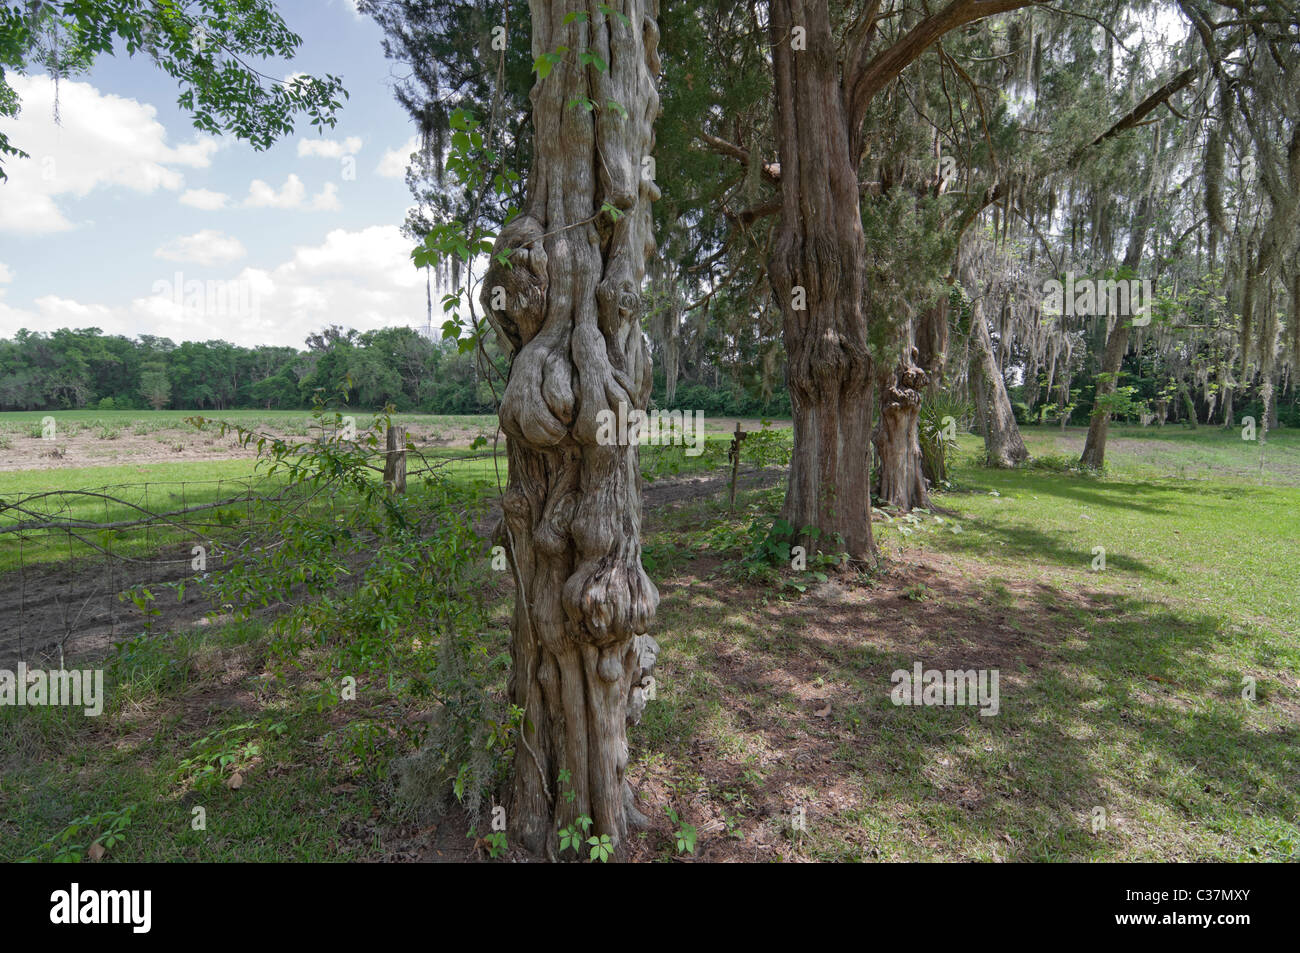 Dudley Farm State Historic Site Newberry Florida knotted trunk of old Southern Red cedar trees alongside farm fields Stock Photo